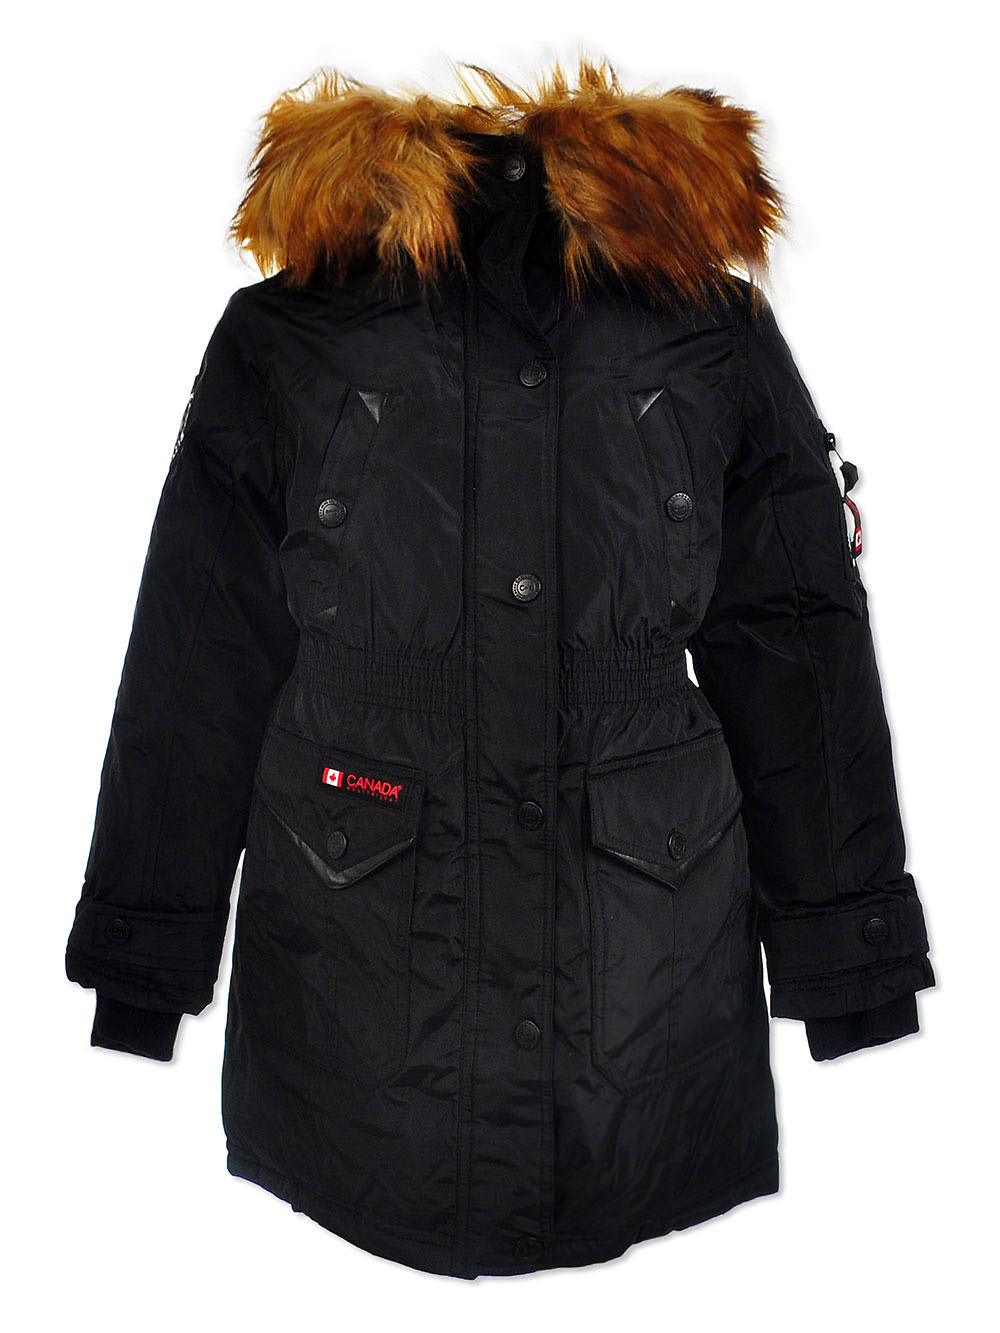 Insulated Winter Jacket